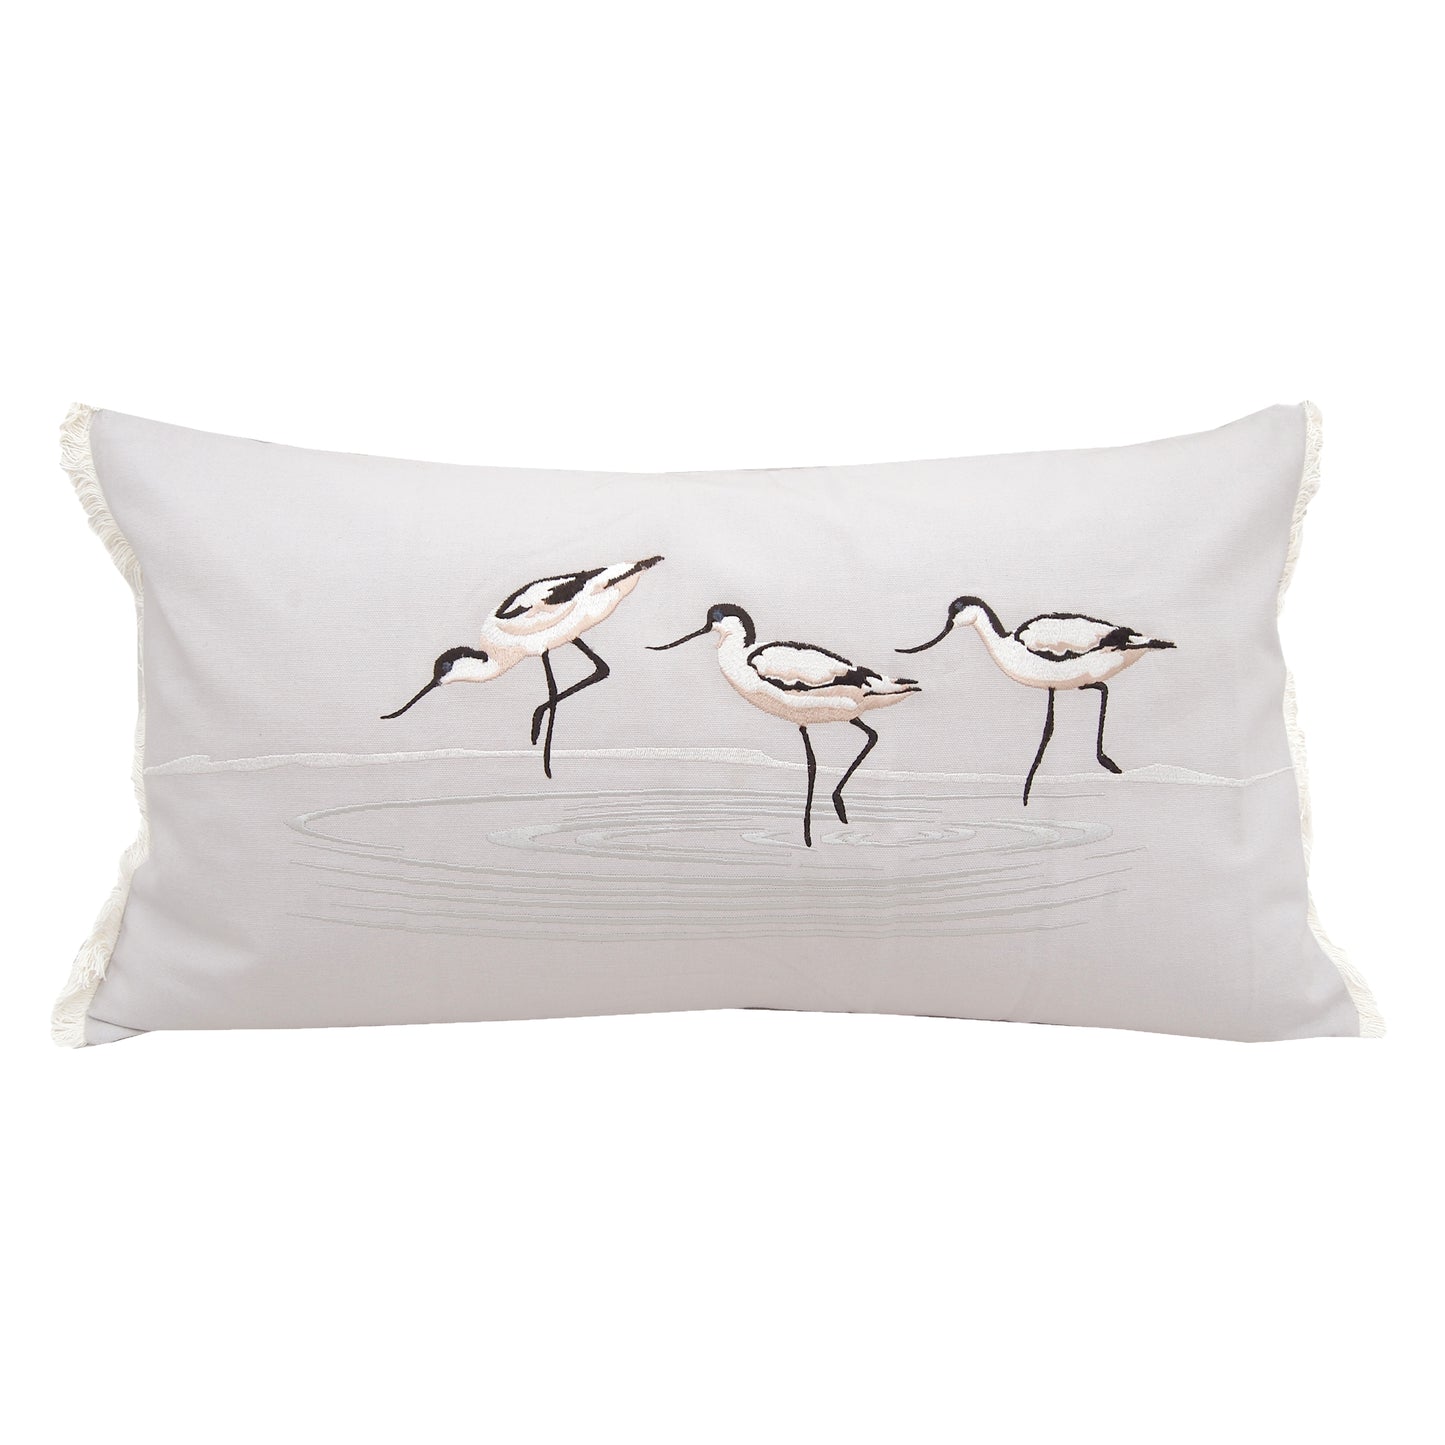 Three avocent birds wading through a pool of water; embroidered on a soft grey background with white fringe edging. Lumbar indoor pillow.